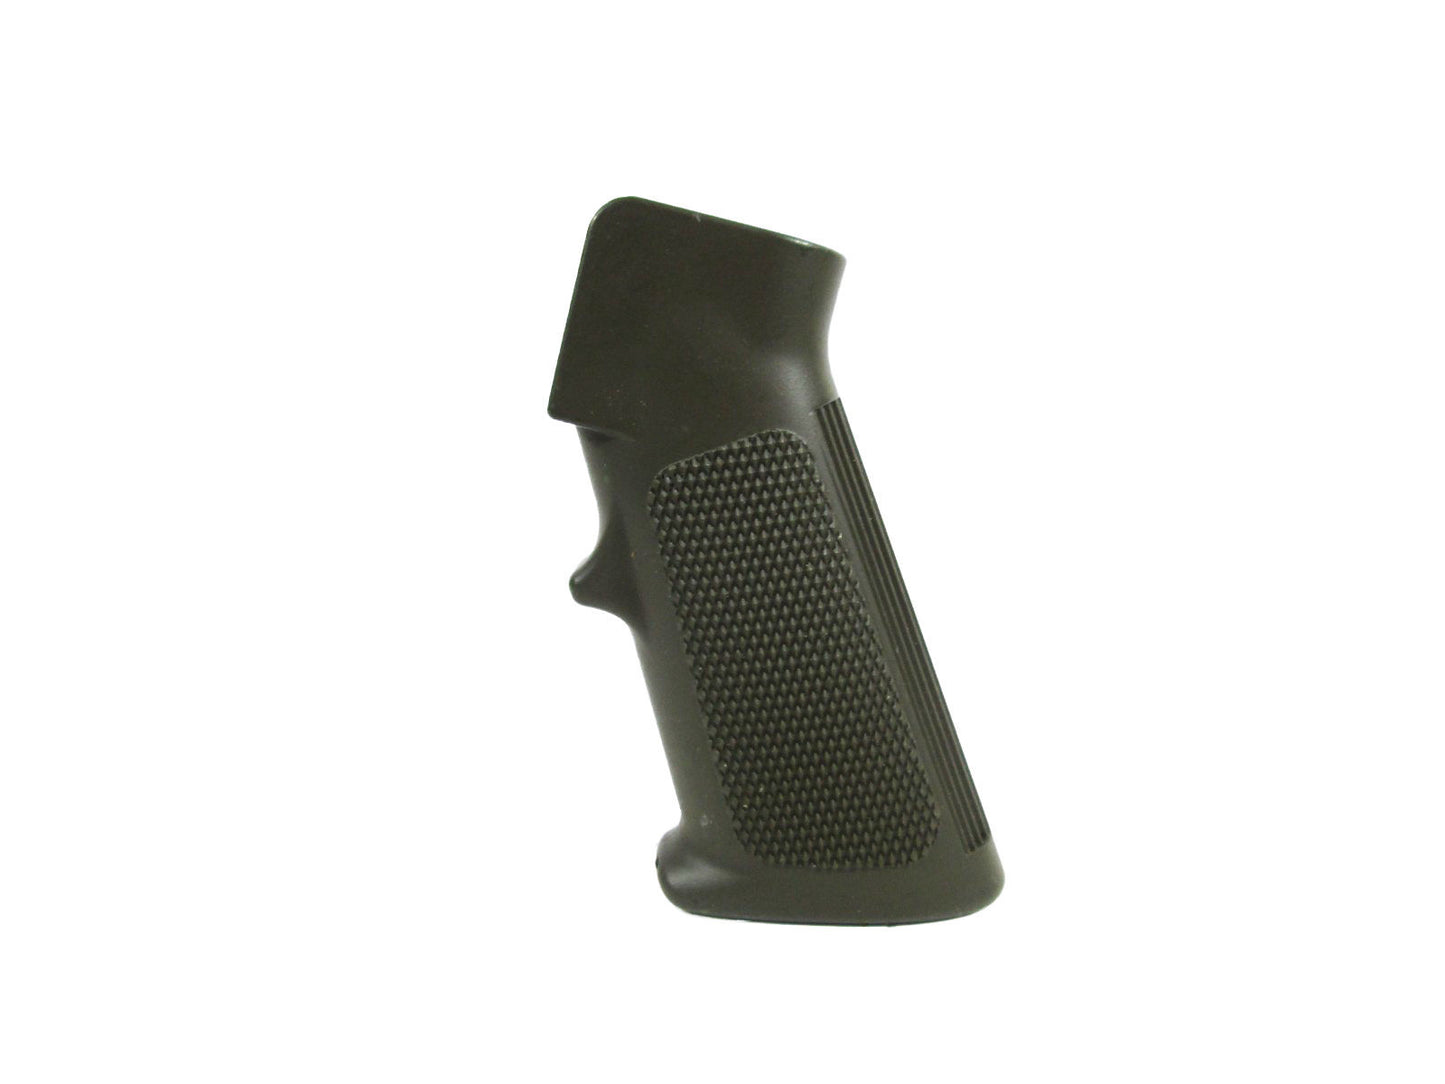 Green SR-2 MB06 Replacement Grip